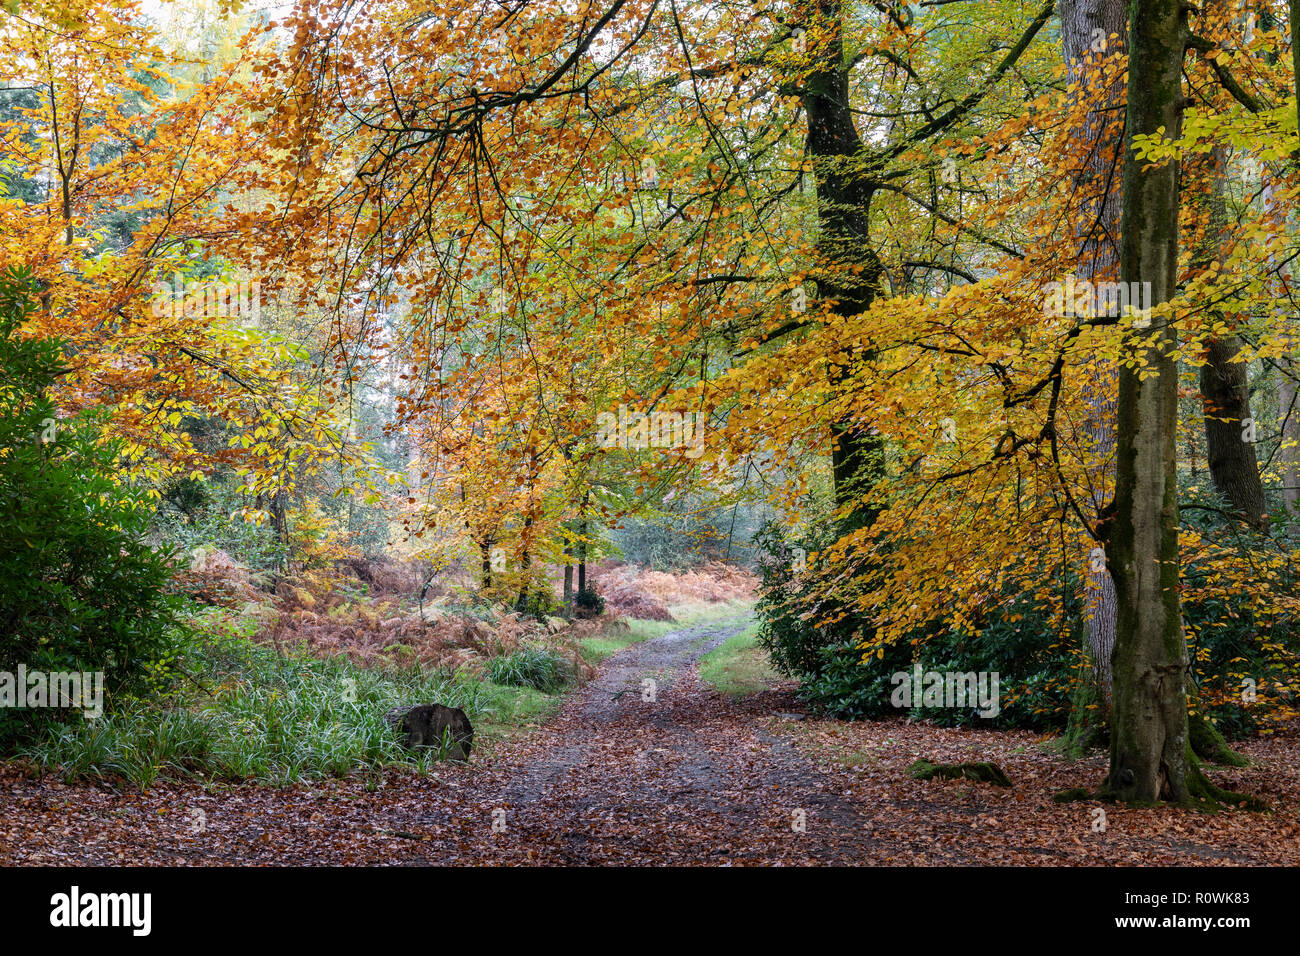 Track through Shearwater forest on The Longleat Estate in autumn, Wiltshire, England, UK Stock Photo